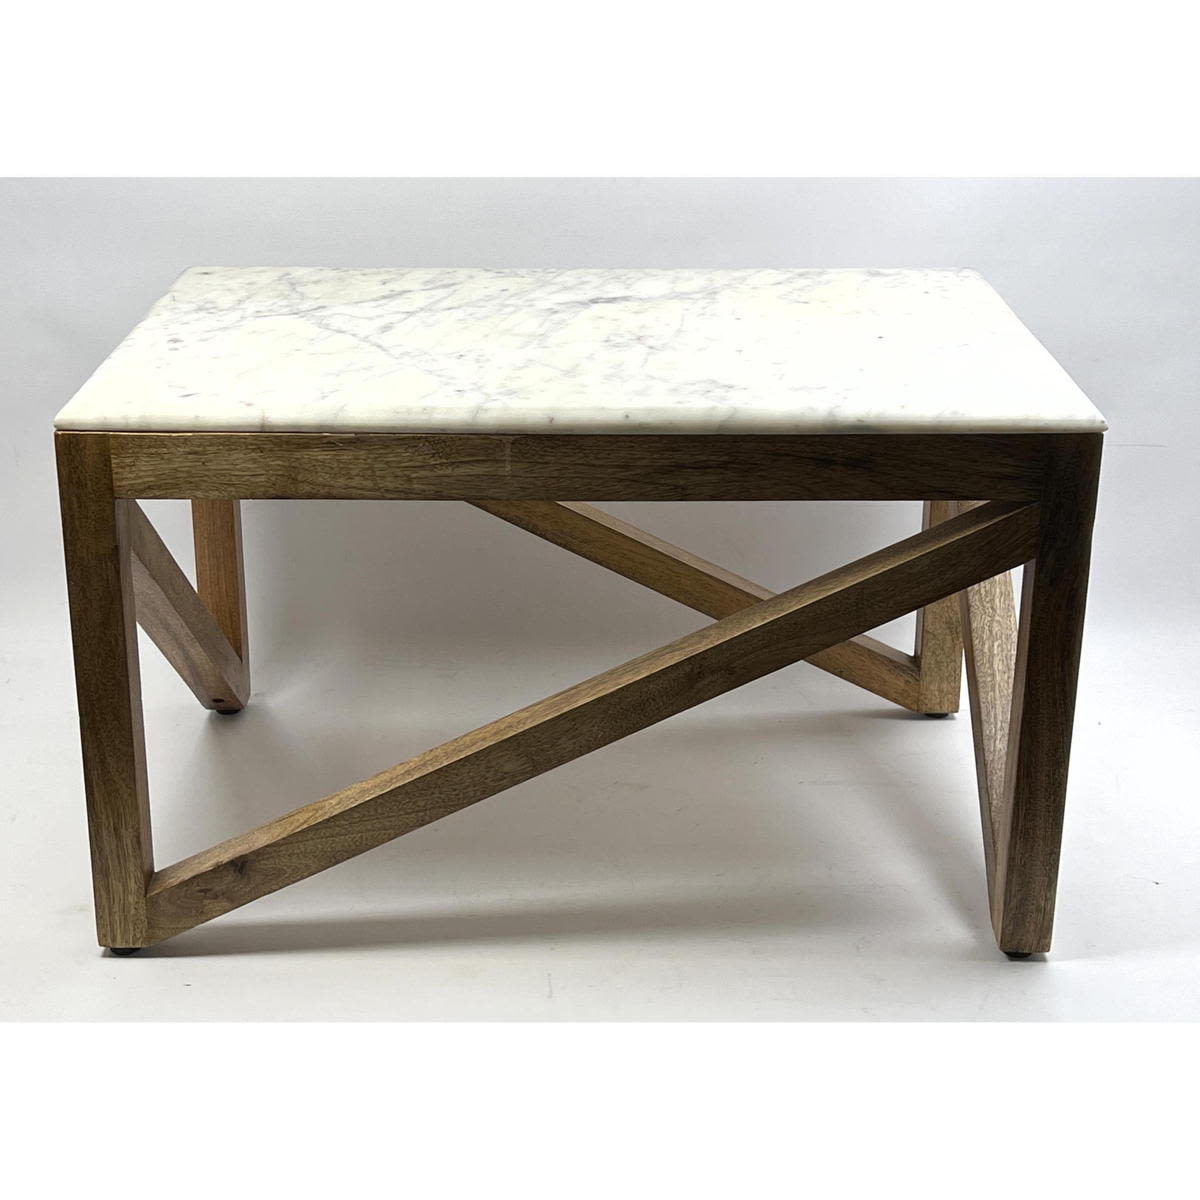 Small Marble Top Table. Cleverly constructed